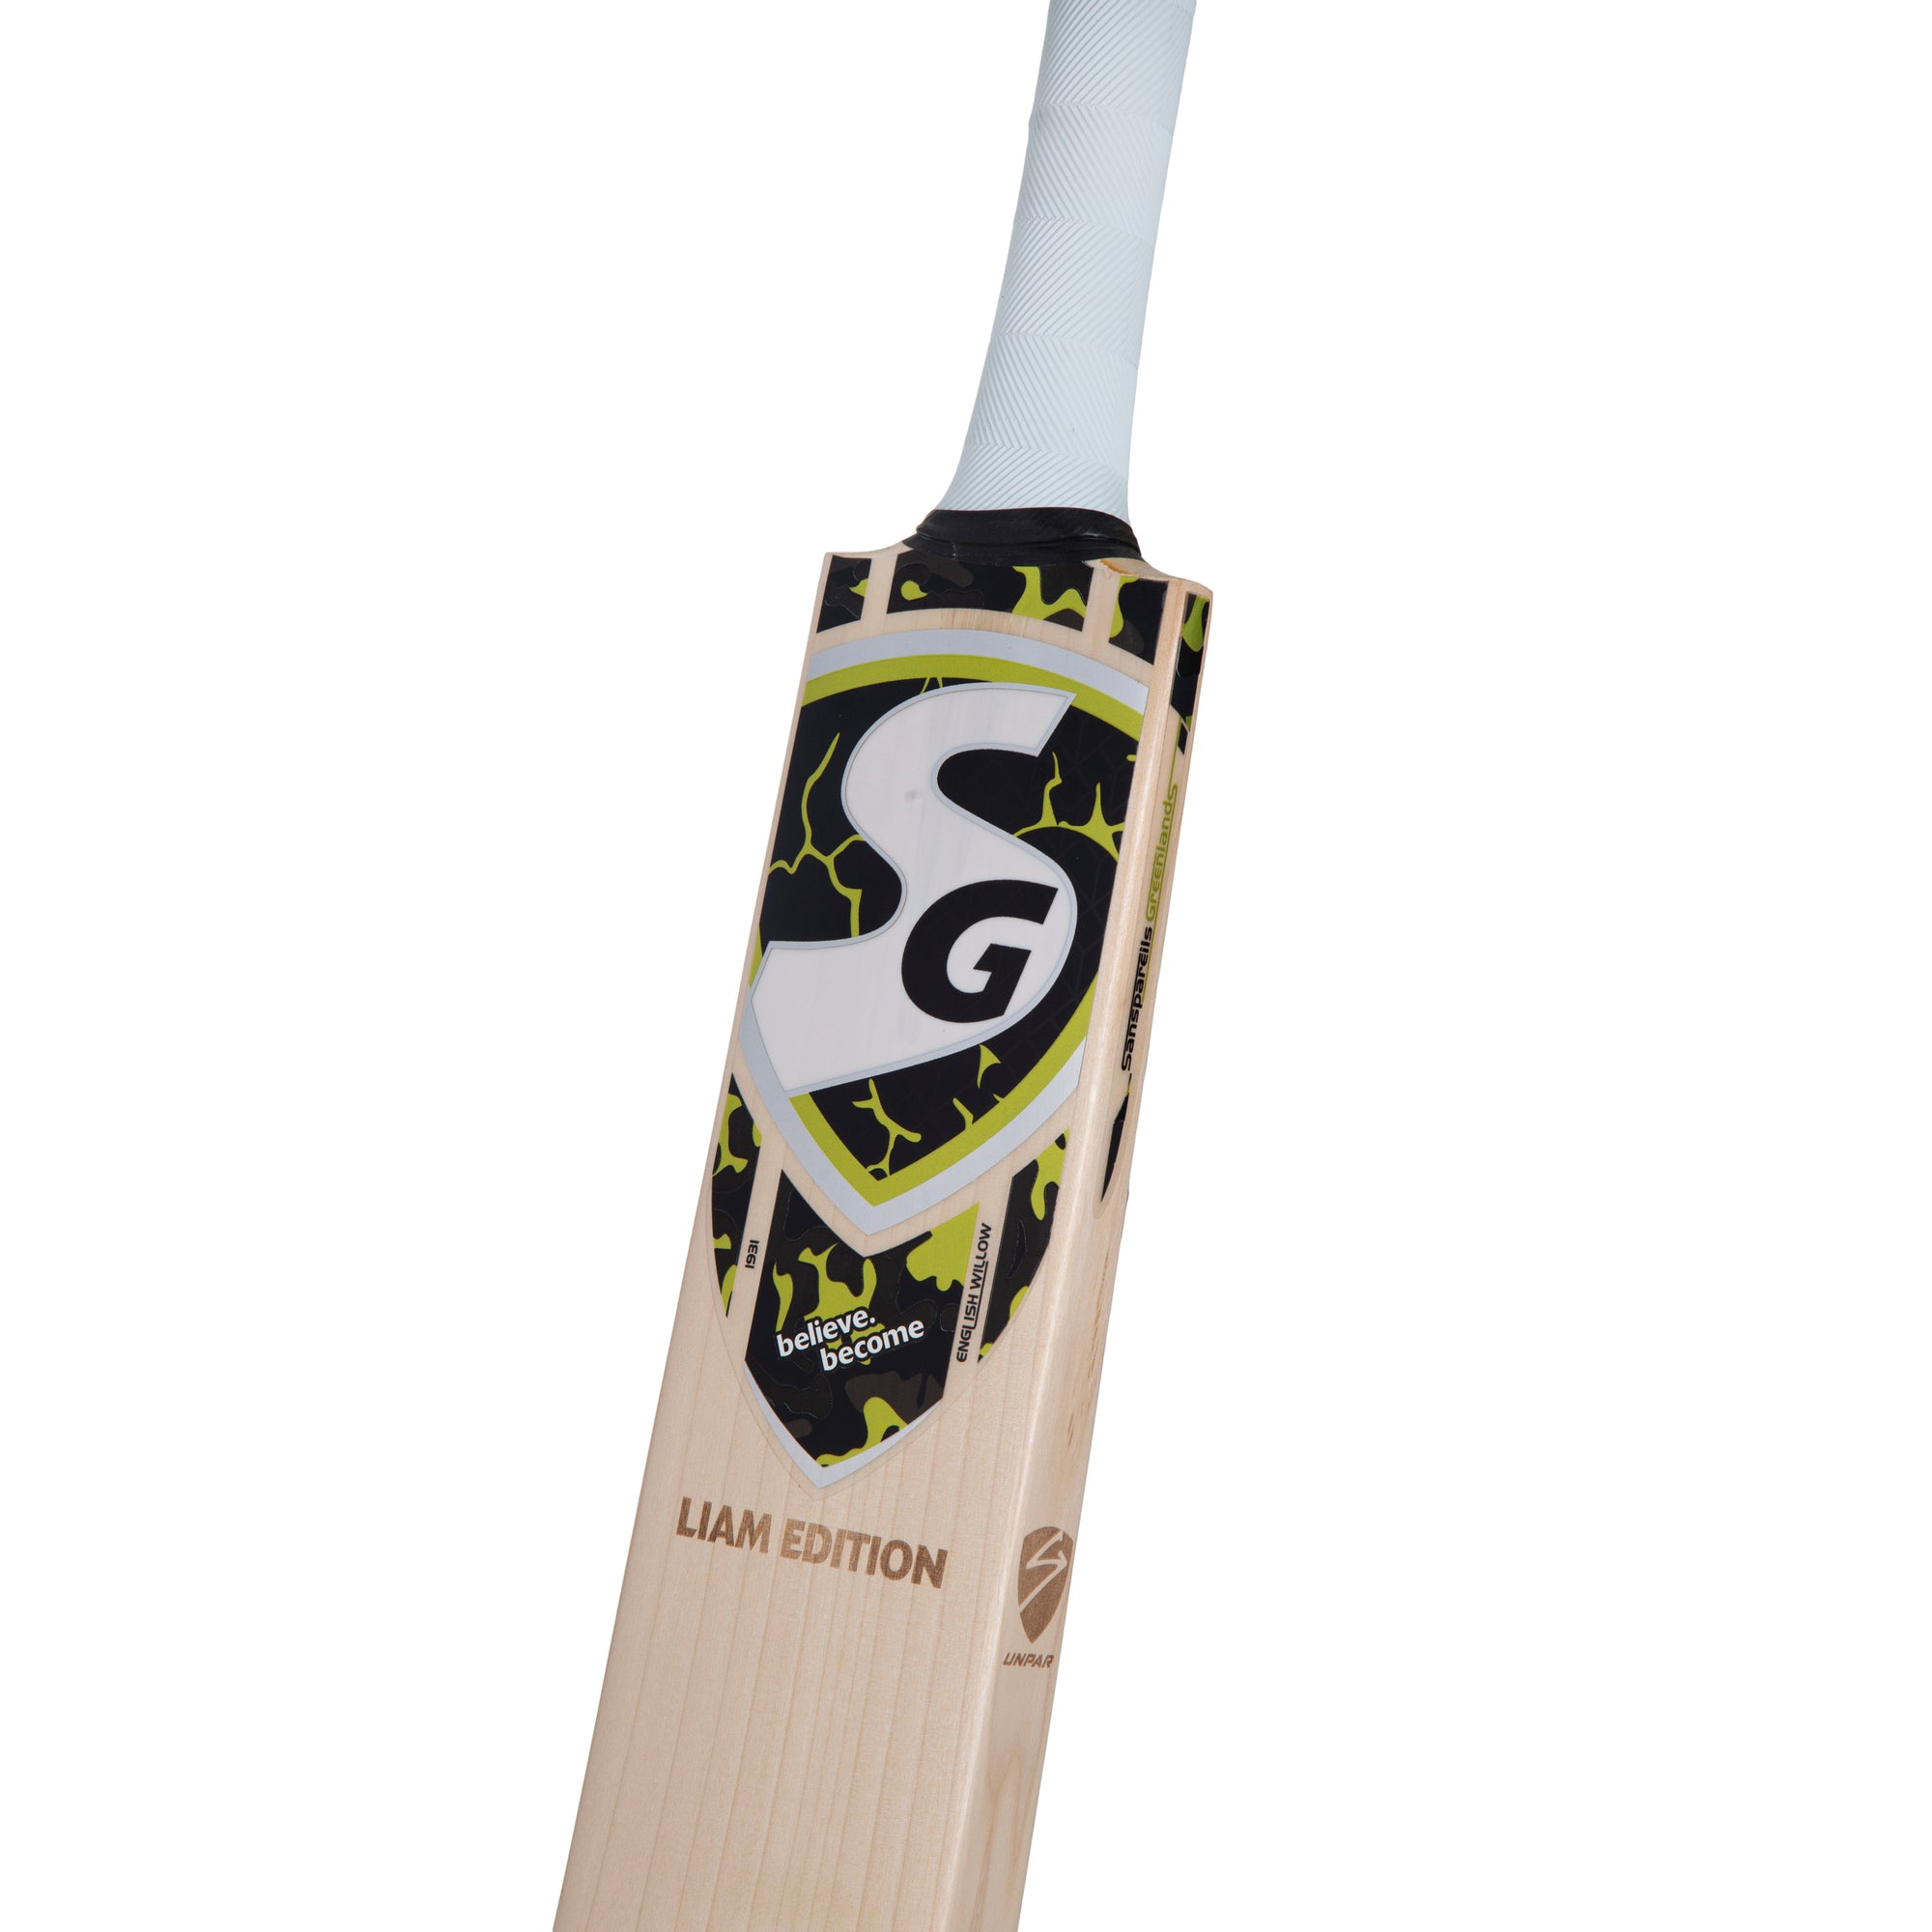 SG LIAM PLAYERS EDITION ENGLISH WILLOW CRICKET BAT - 2023